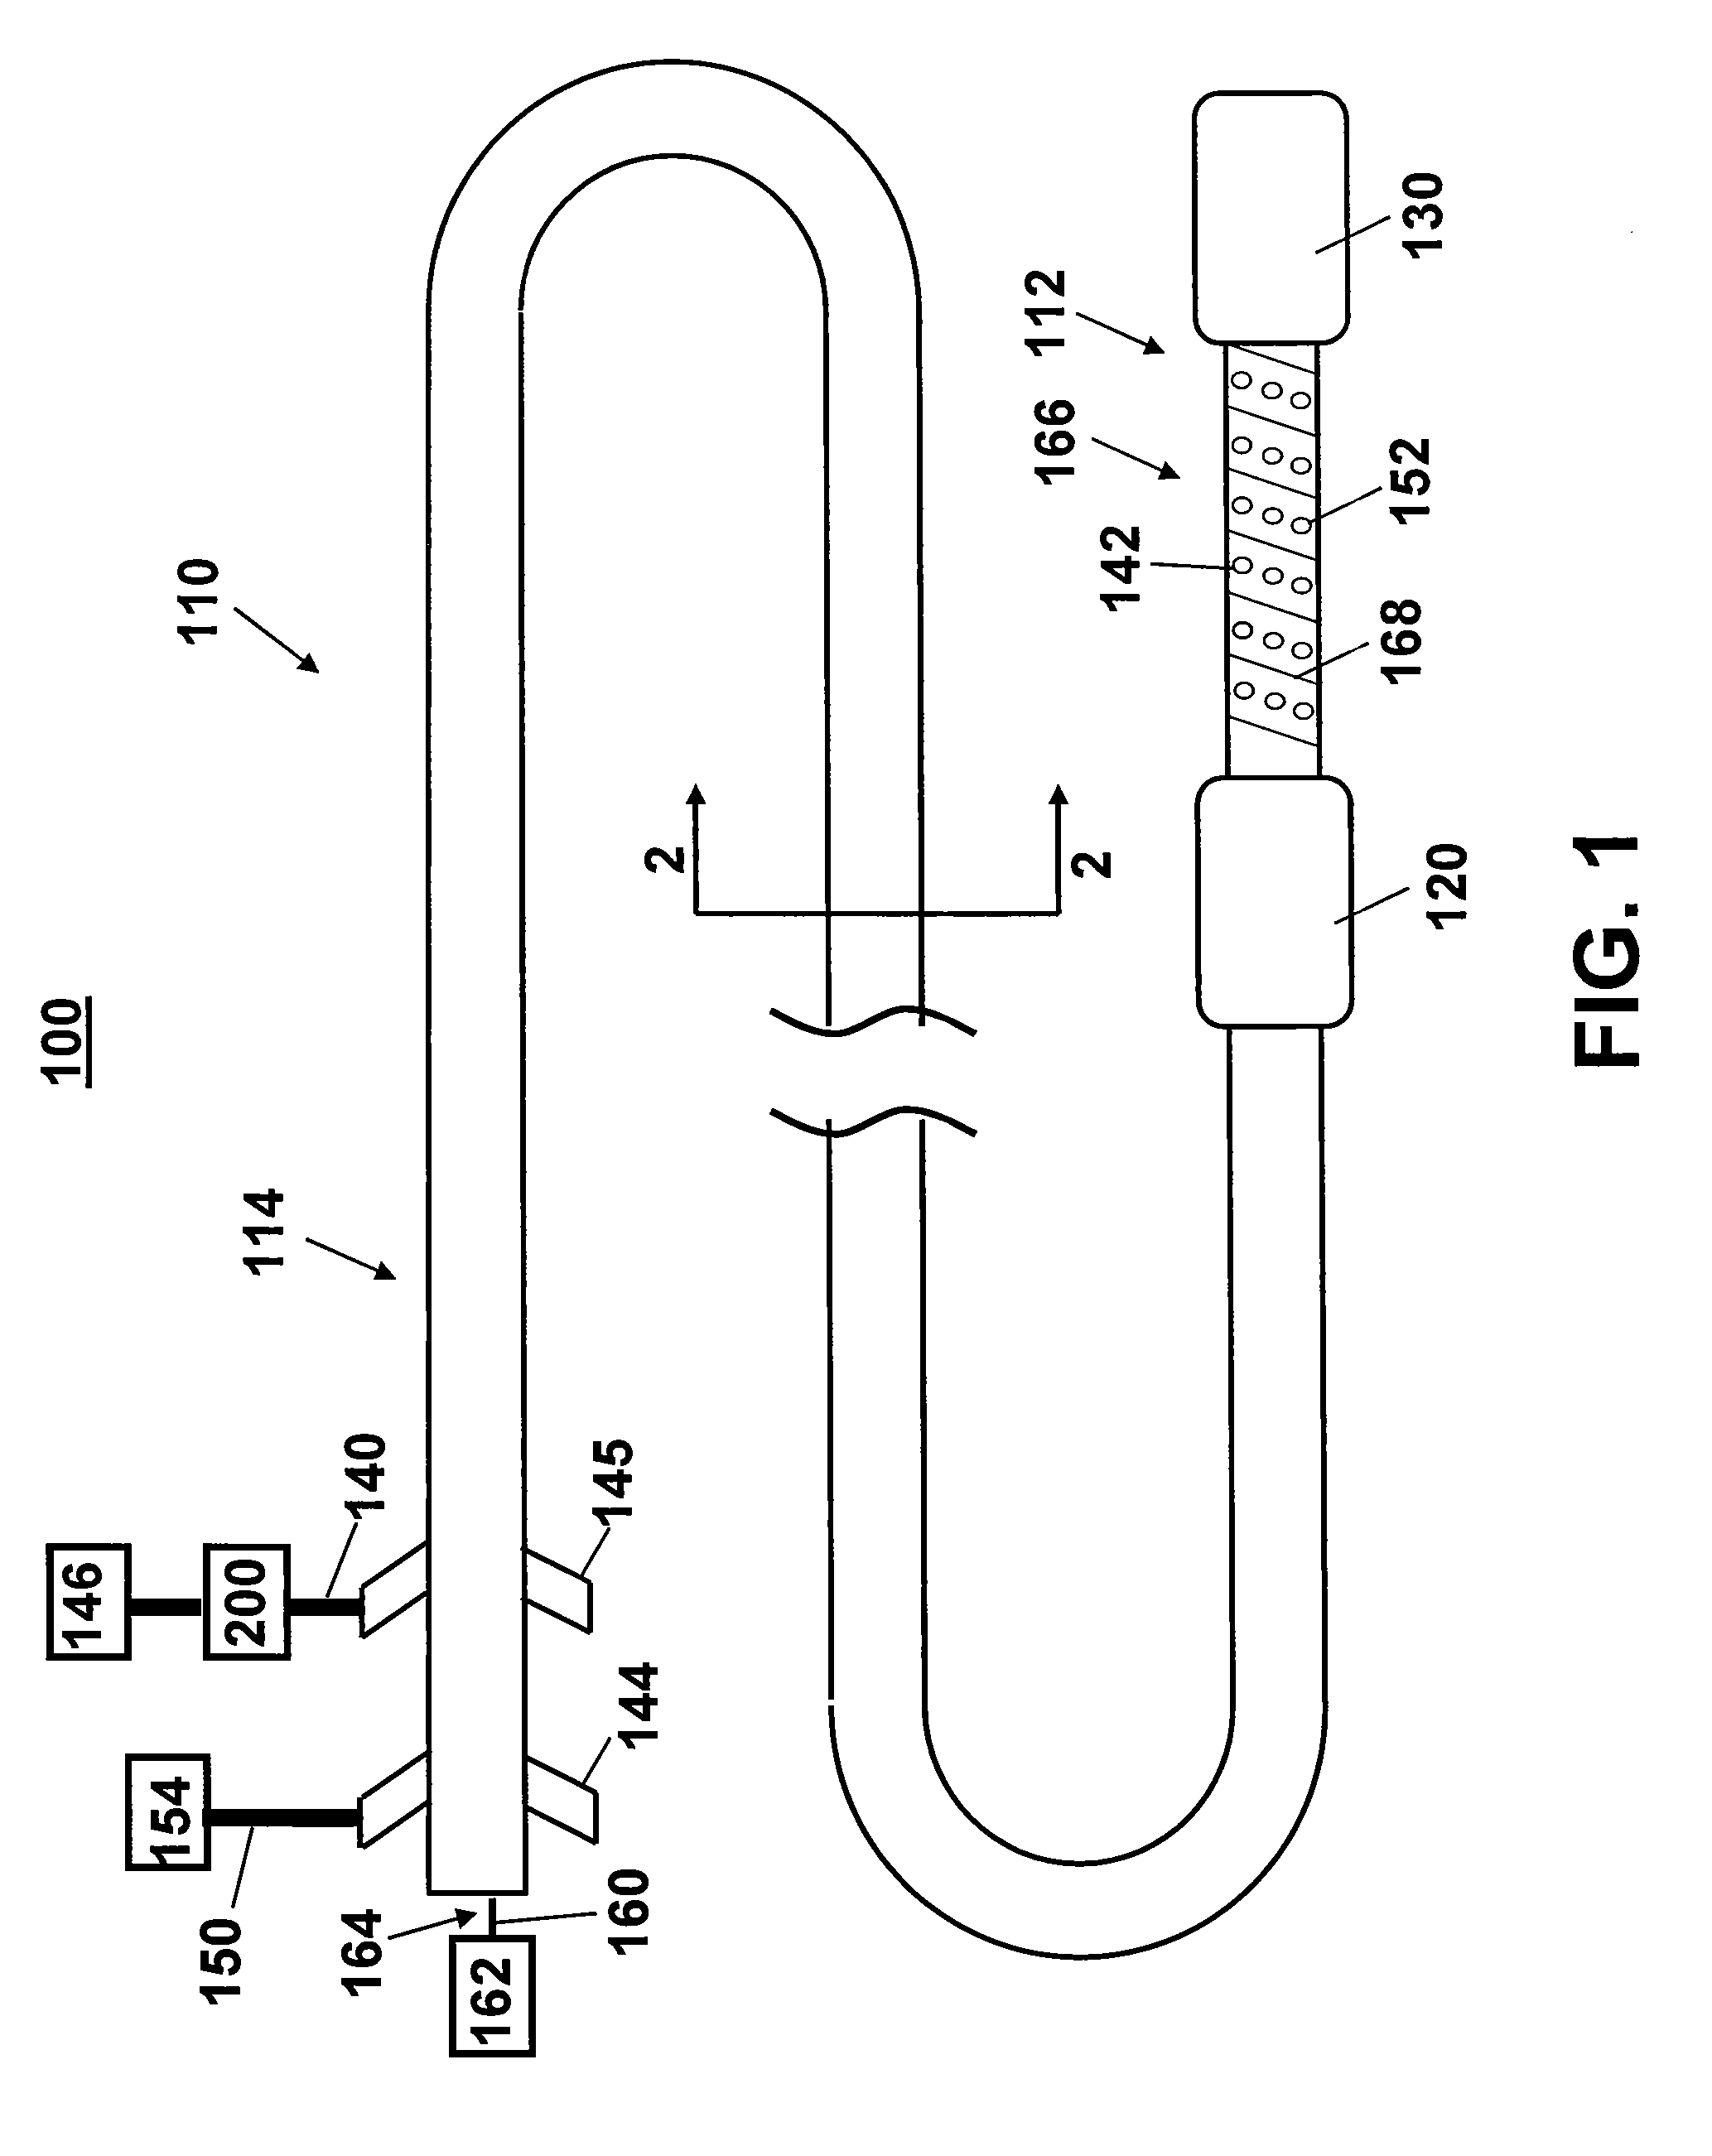 Closed loop catheter photopolymerization system and method of treating a vascular condition